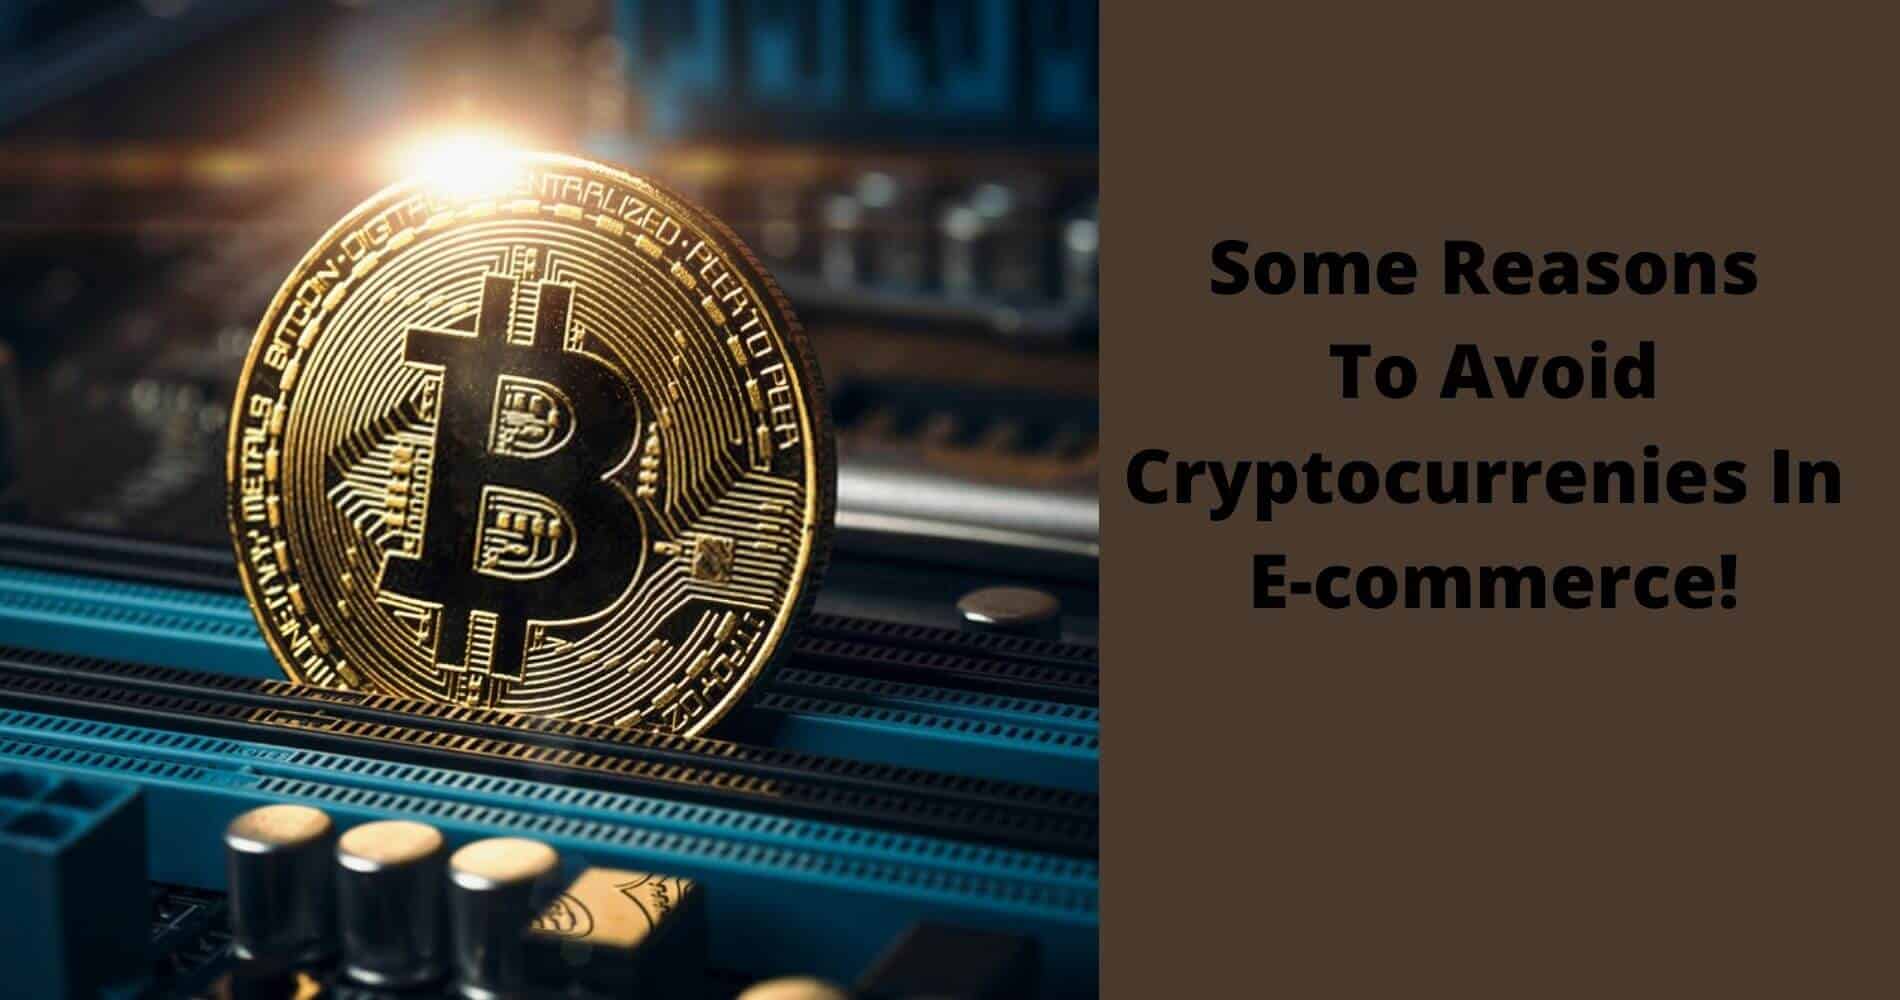 To Avoid Cryptocurrencies In E-commerce!